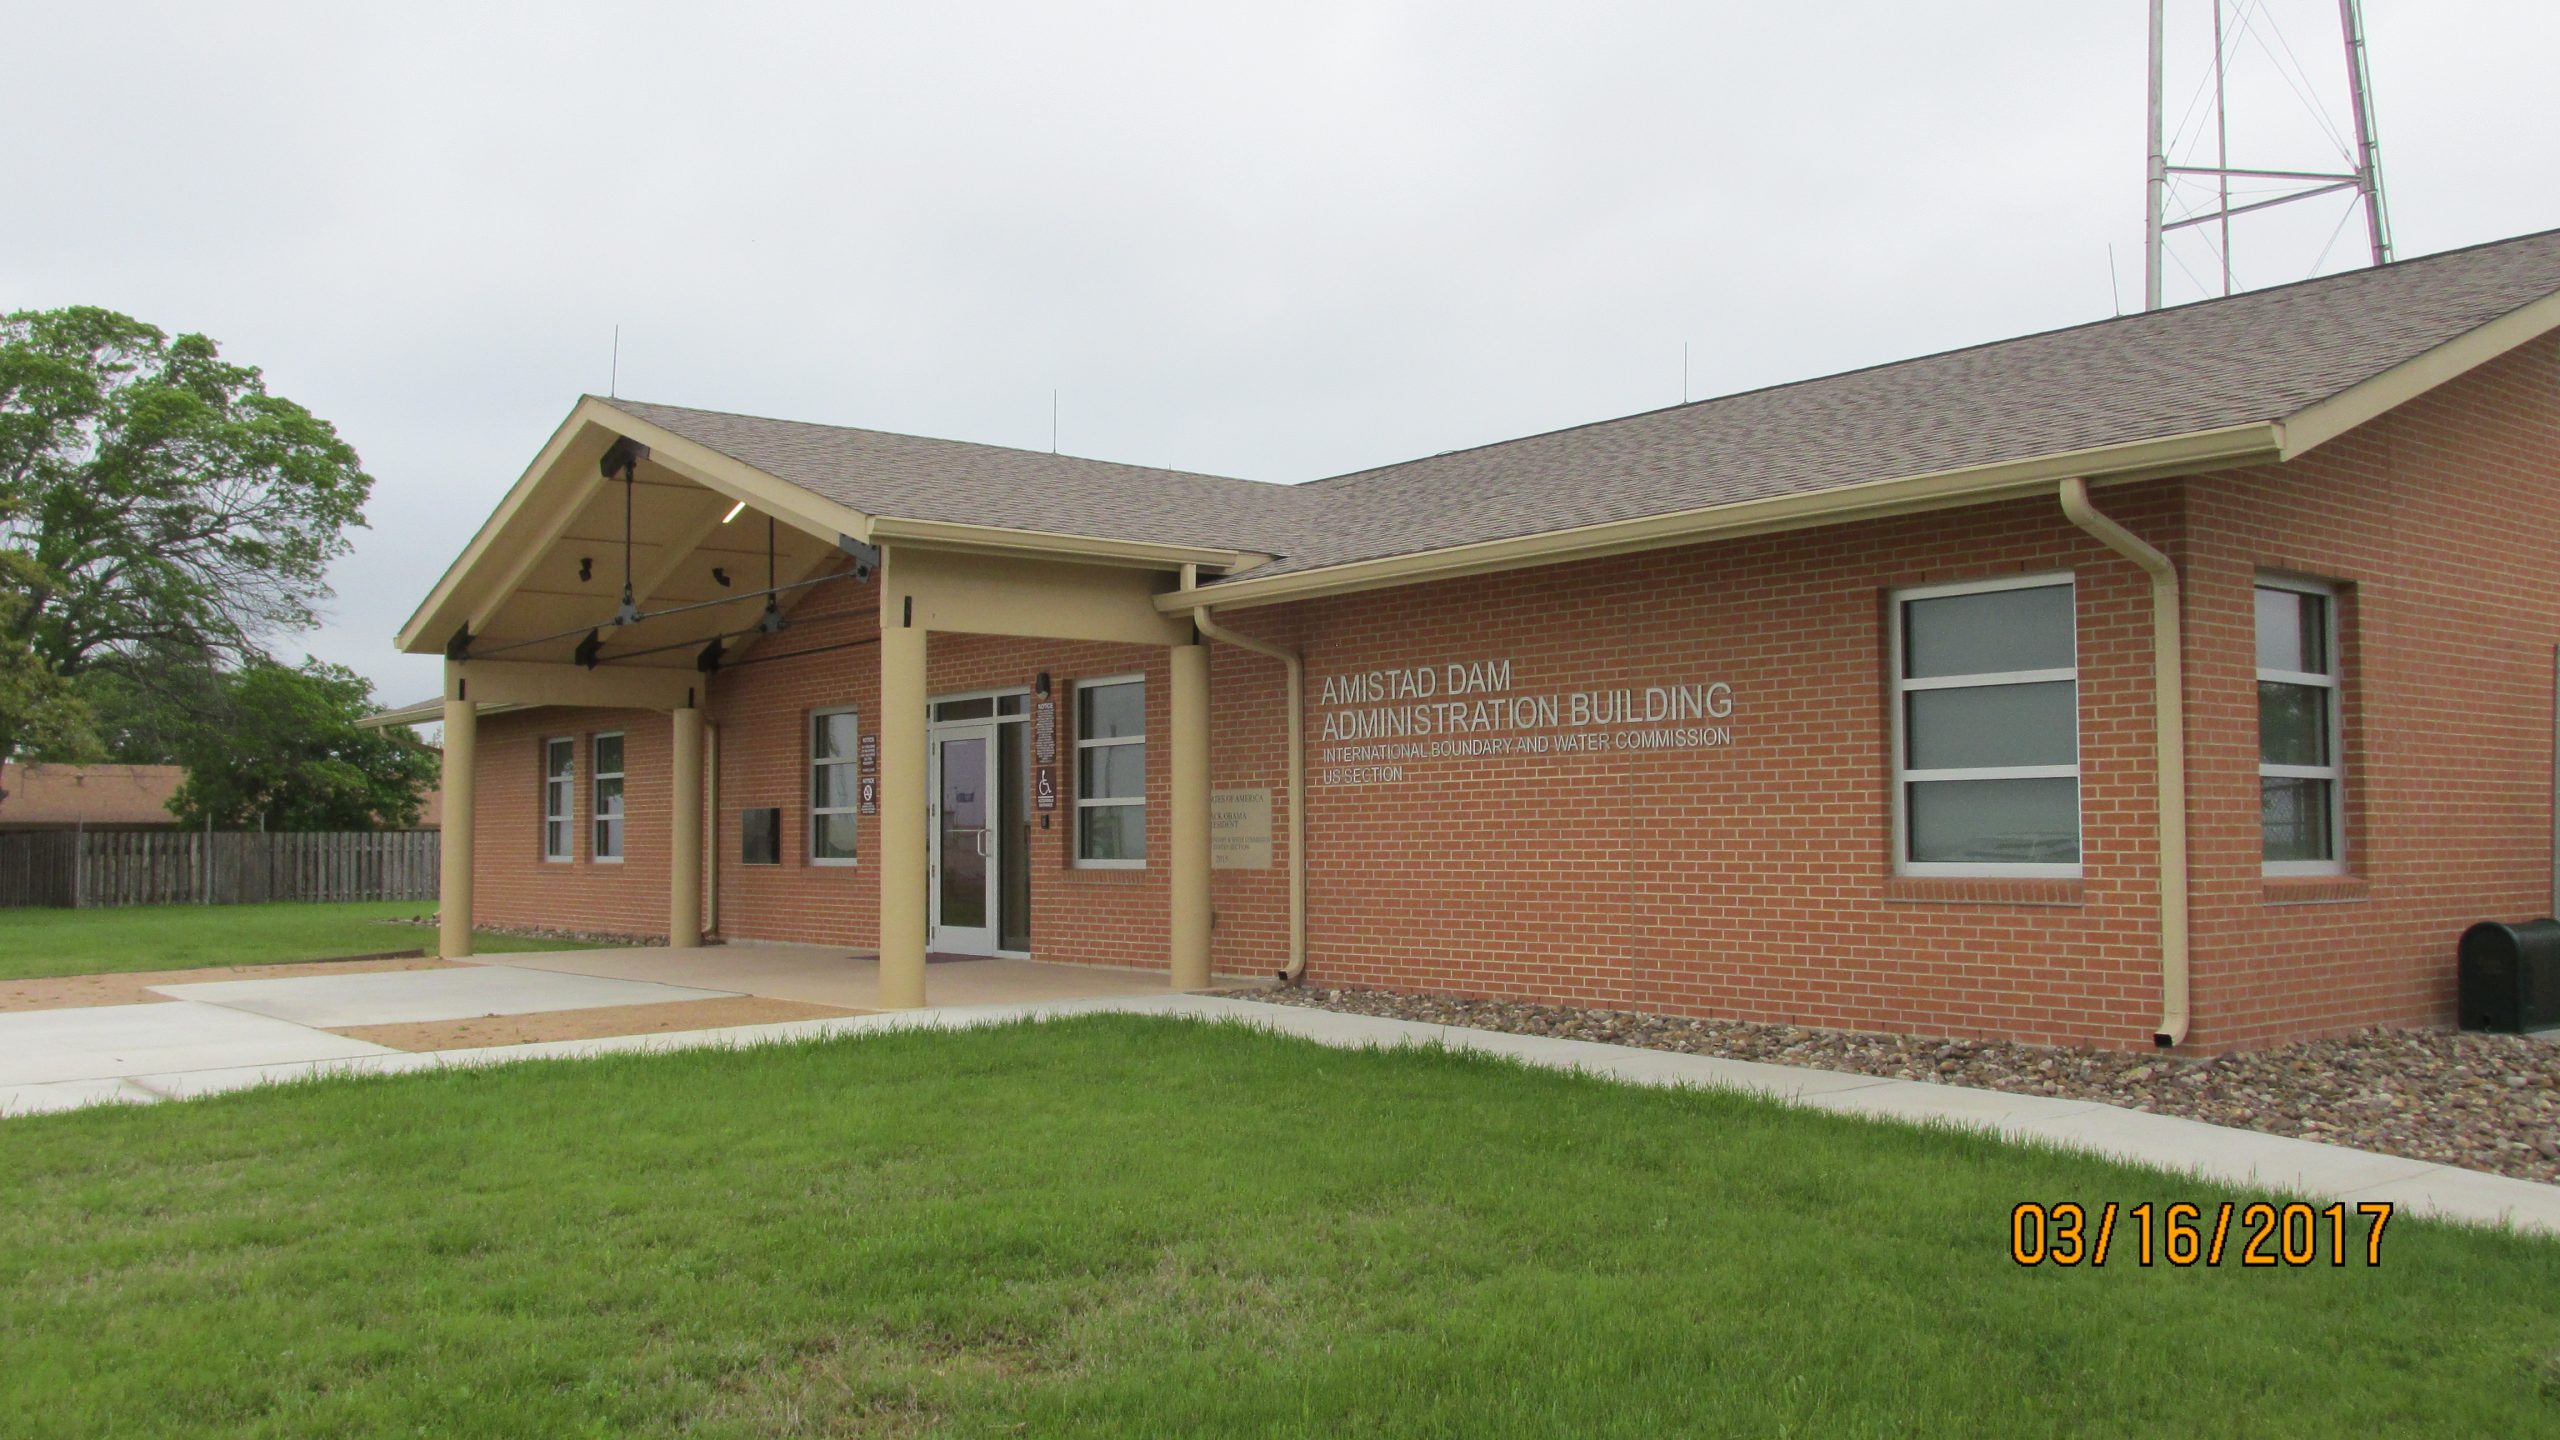 Amistad Field Office administration building